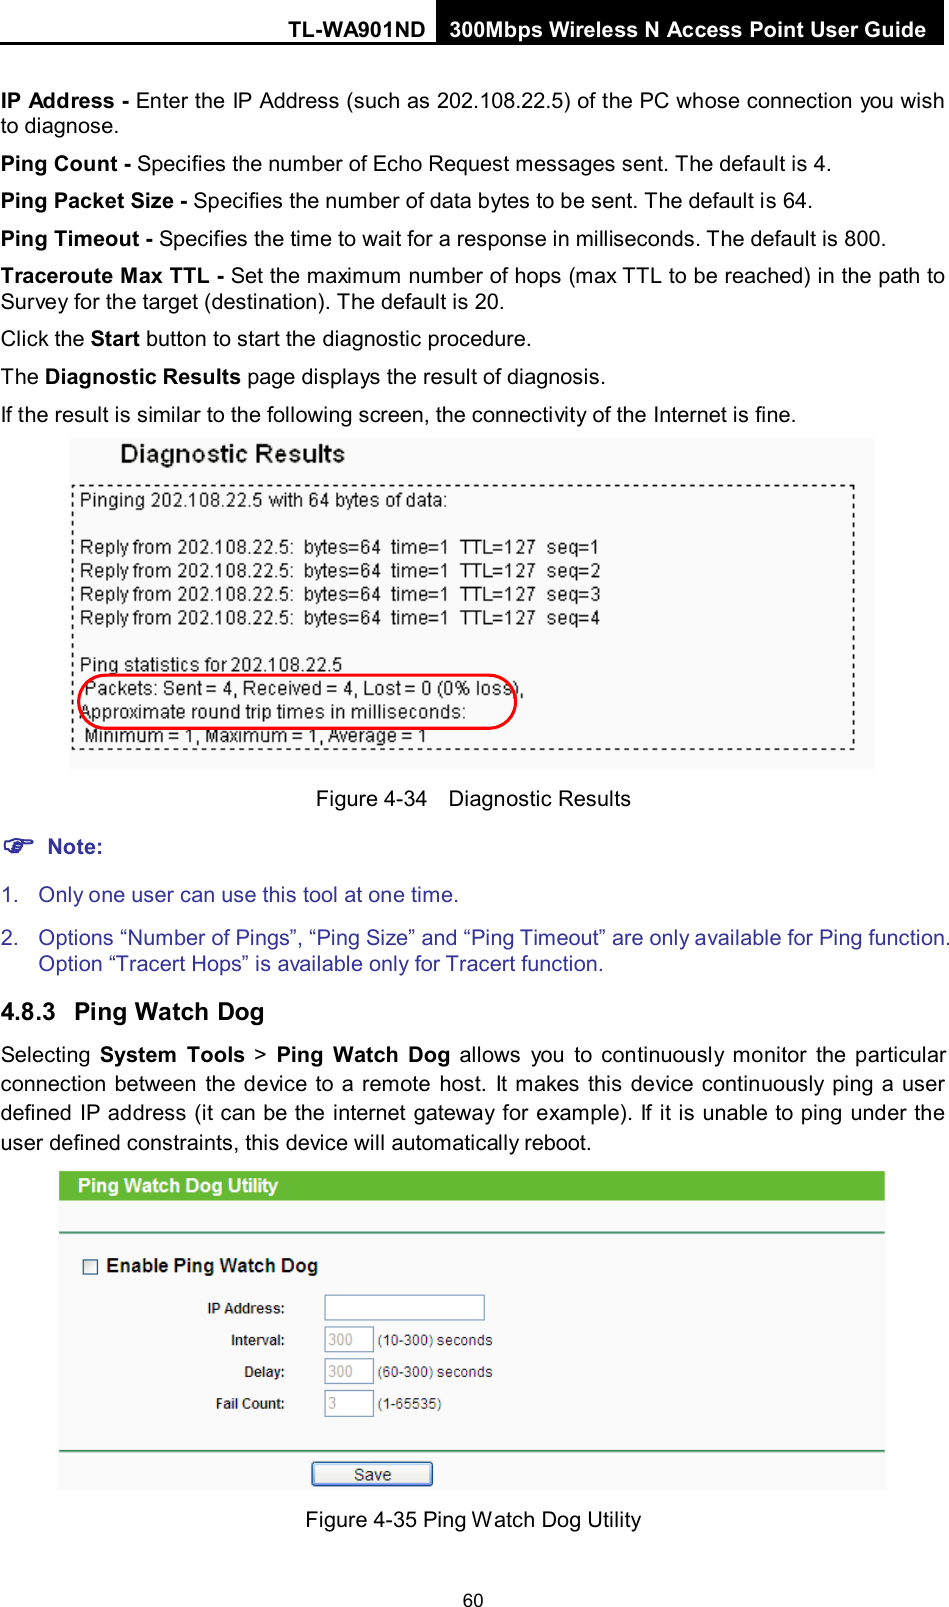 TL-WA901ND 300Mbps Wireless N Access Point User Guide  60 IP Address - Enter the IP Address (such as 202.108.22.5) of the PC whose connection you wish to diagnose. Ping Count - Specifies the number of Echo Request messages sent. The default is 4.   Ping Packet Size - Specifies the number of data bytes to be sent. The default is 64. Ping Timeout - Specifies the time to wait for a response in milliseconds. The default is 800. Traceroute Max TTL - Set the maximum number of hops (max TTL to be reached) in the path to Survey for the target (destination). The default is 20.   Click the Start button to start the diagnostic procedure. The Diagnostic Results page displays the result of diagnosis. If the result is similar to the following screen, the connectivity of the Internet is fine.  Figure 4-34  Diagnostic Results  Note: 1. Only one user can use this tool at one time.   2.  Options “Number of Pings”, “Ping Size” and “Ping Timeout” are only available for Ping function. Option “Tracert Hops” is available only for Tracert function. 4.8.3 Ping Watch Dog Selecting  System Tools &gt;  Ping Watch Dog allows you to continuously monitor the particular connection between the device to a remote host. It makes this device continuously ping a user defined IP address (it can be the internet gateway for example). If it is unable to ping under the user defined constraints, this device will automatically reboot.  Figure 4-35 Ping Watch Dog Utility 